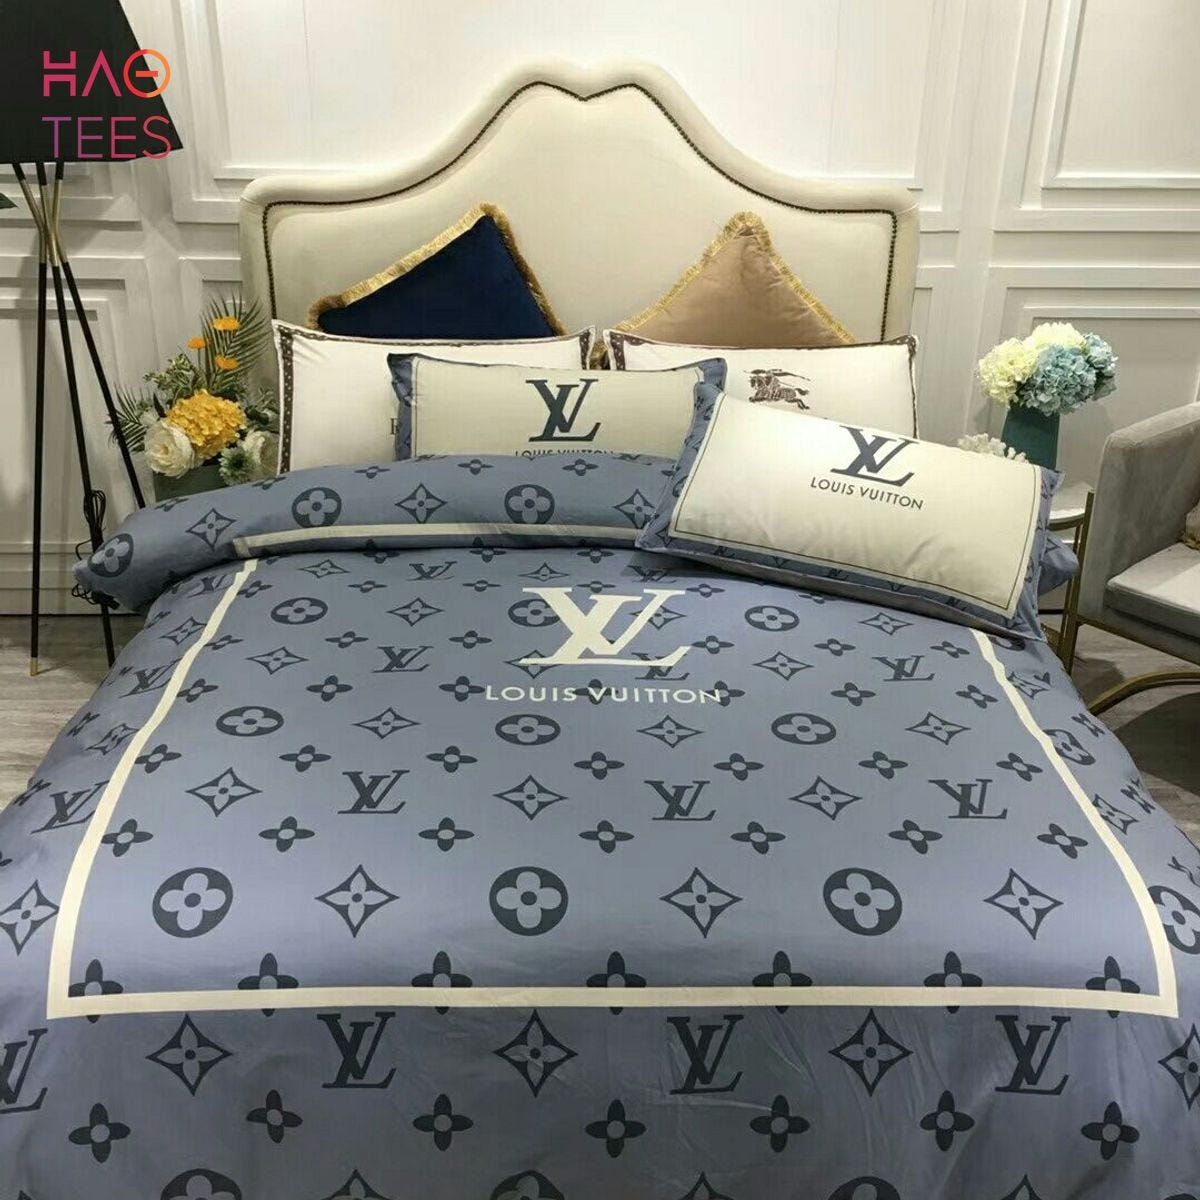 LV Bedding Sets Duvet Cover LV Bedroom Sets Luxury Brand Bedding Limited  Edition, by Haotees Store